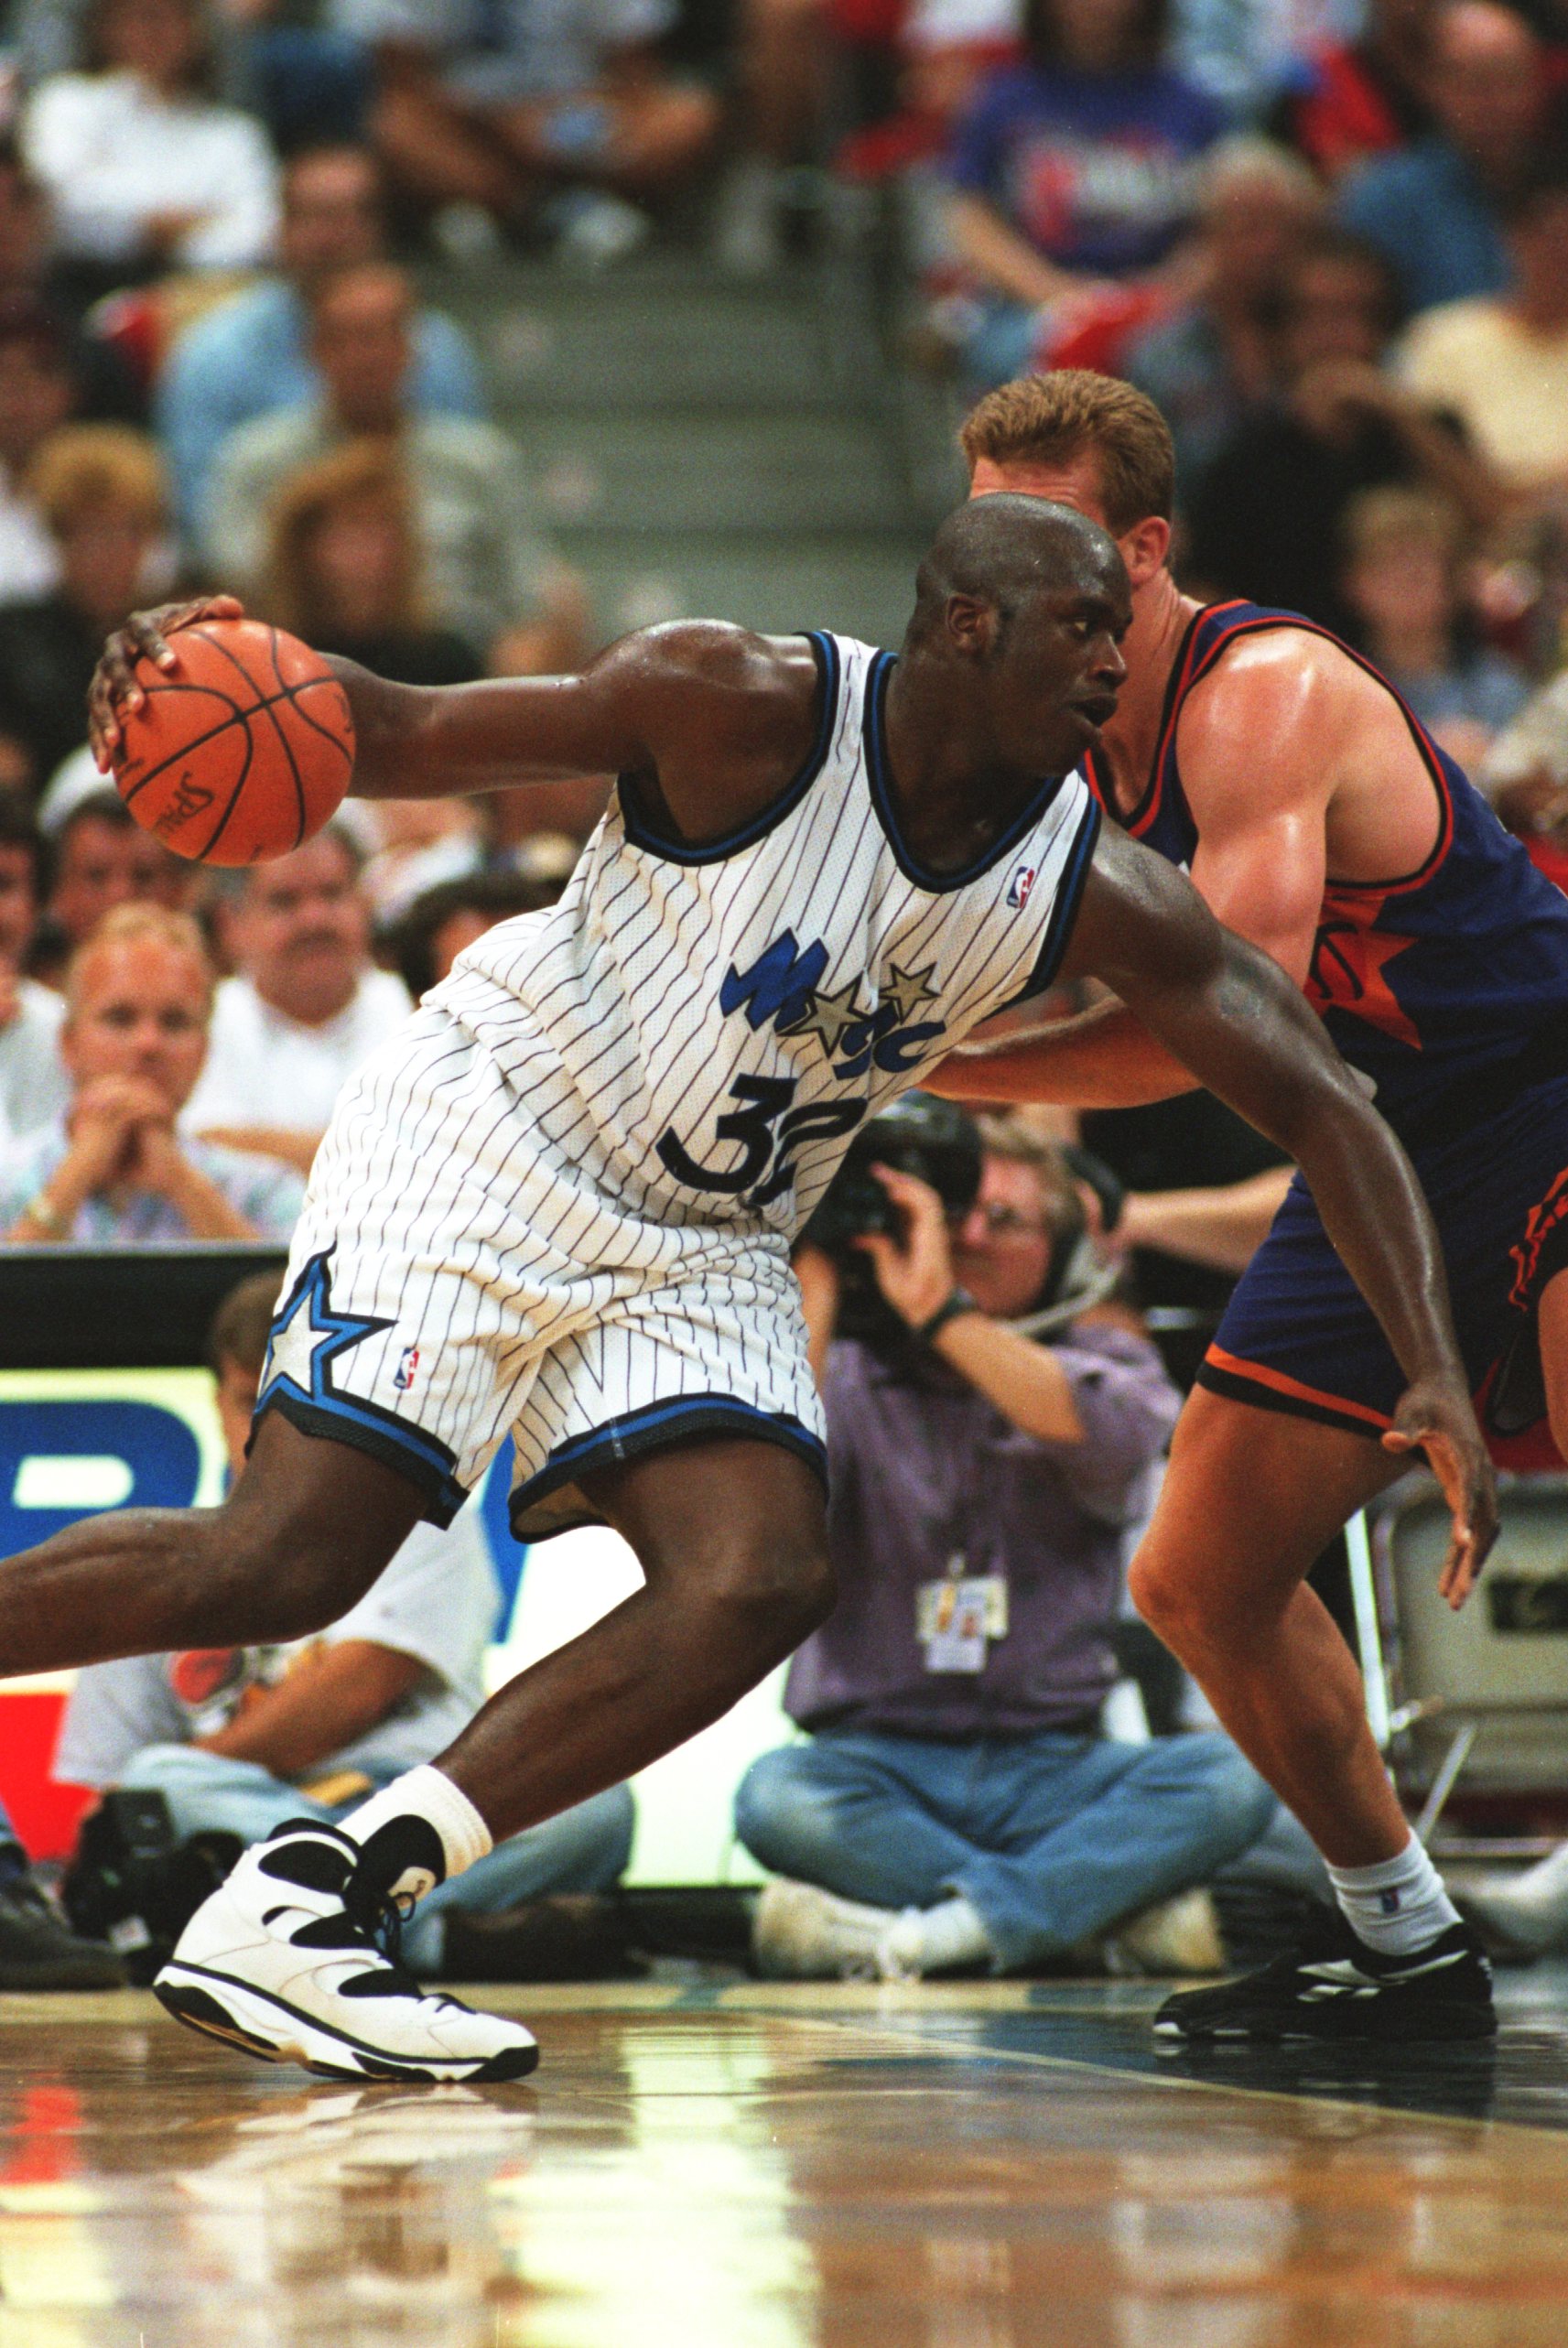 24 Oct 1994: SHAQUILLE O''NEAL OF THE ORLANDO MAGIC ROUNDS A PHOENIX SUNS PLAYER DURING THE SUNS'' 135-129 WIN AT THE ORLANDO ARENA IN FLORIDA.